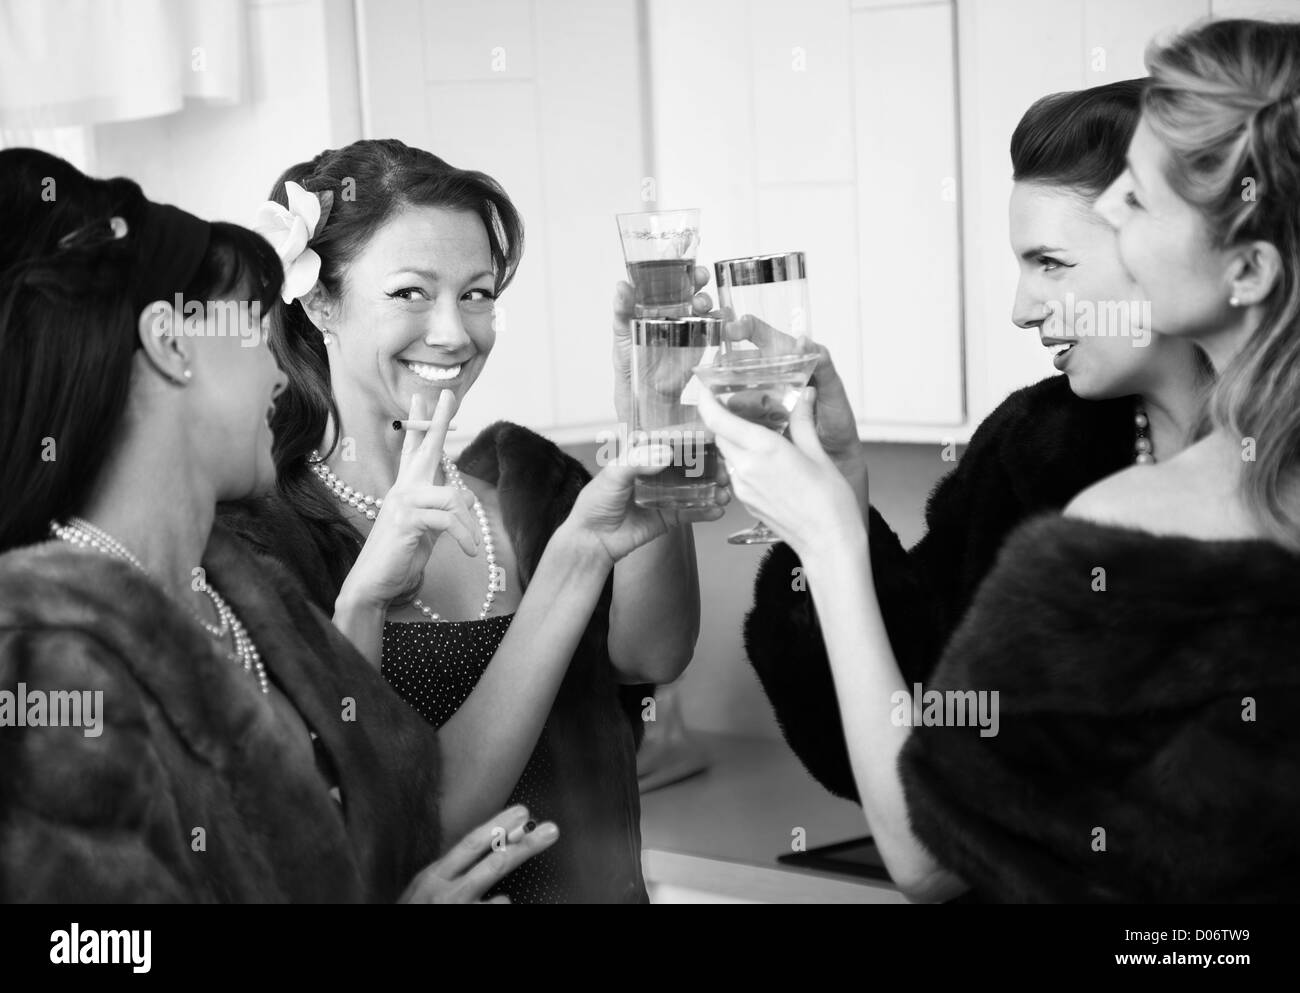 Group of four Caucasian women in a kitchen make a toast Stock Photo